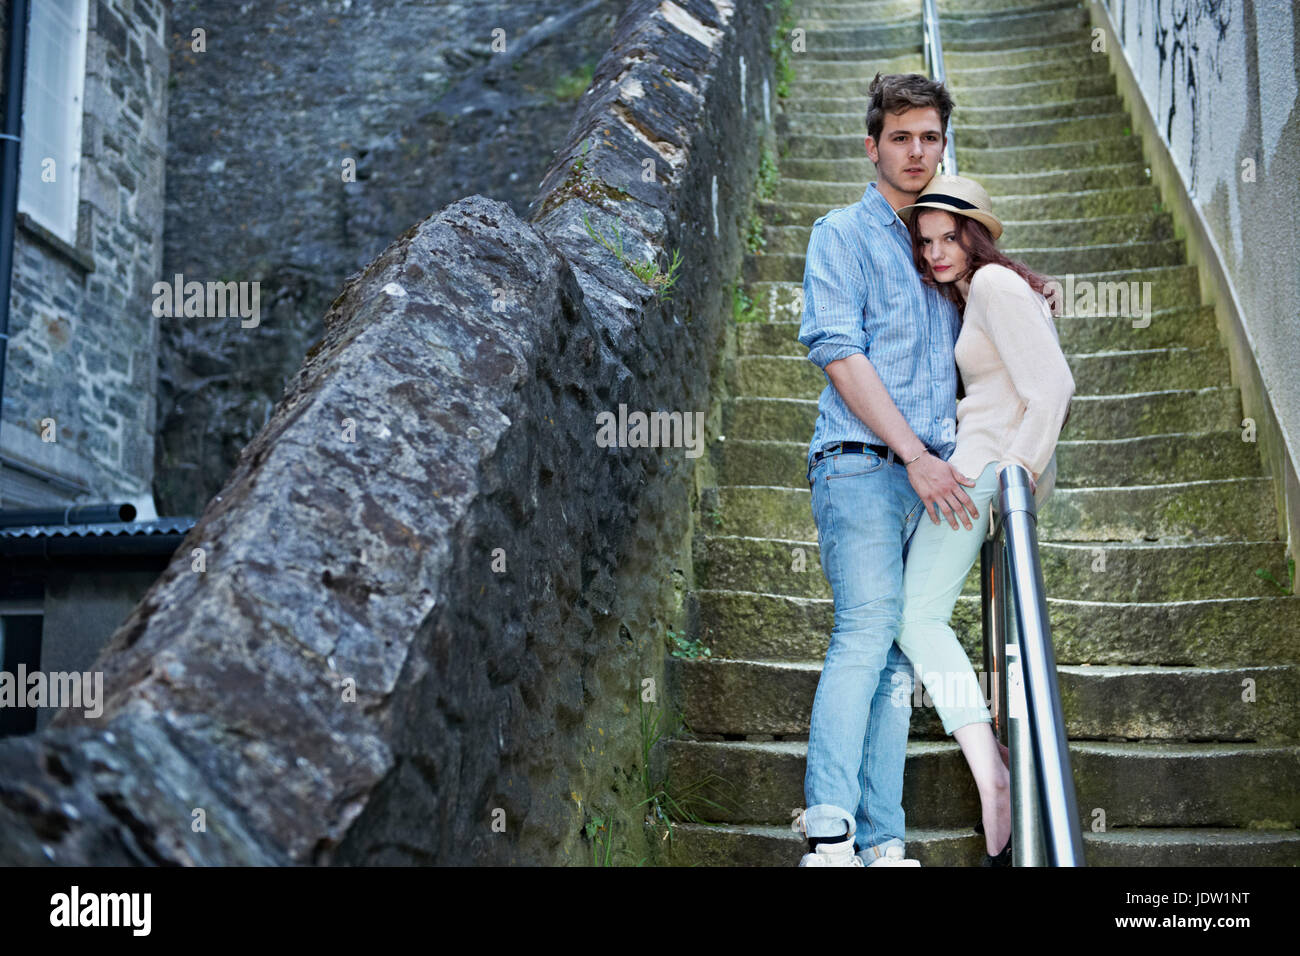 Couple standing on urban steps Stock Photo